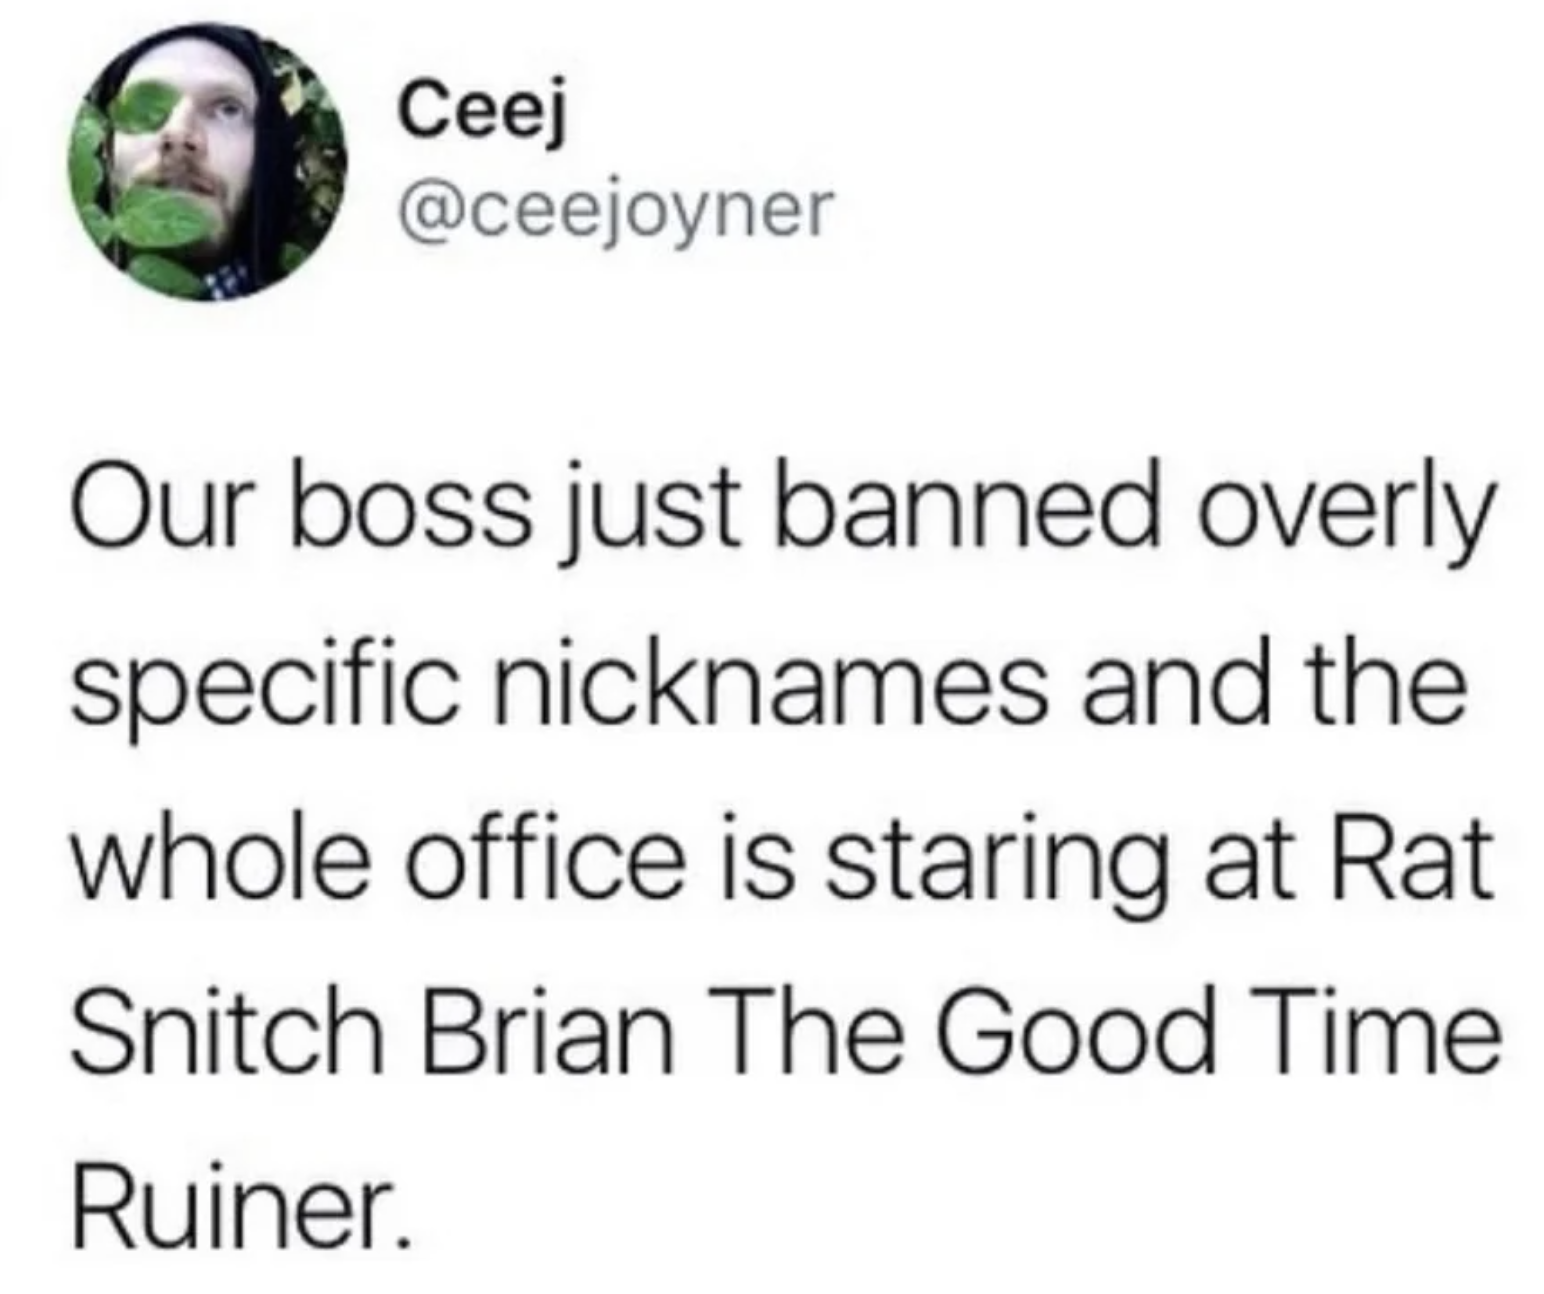 meme nicknames - Ceej Our boss just banned overly specific nicknames and the whole office is staring at Rat Snitch Brian The Good Time Ruiner.